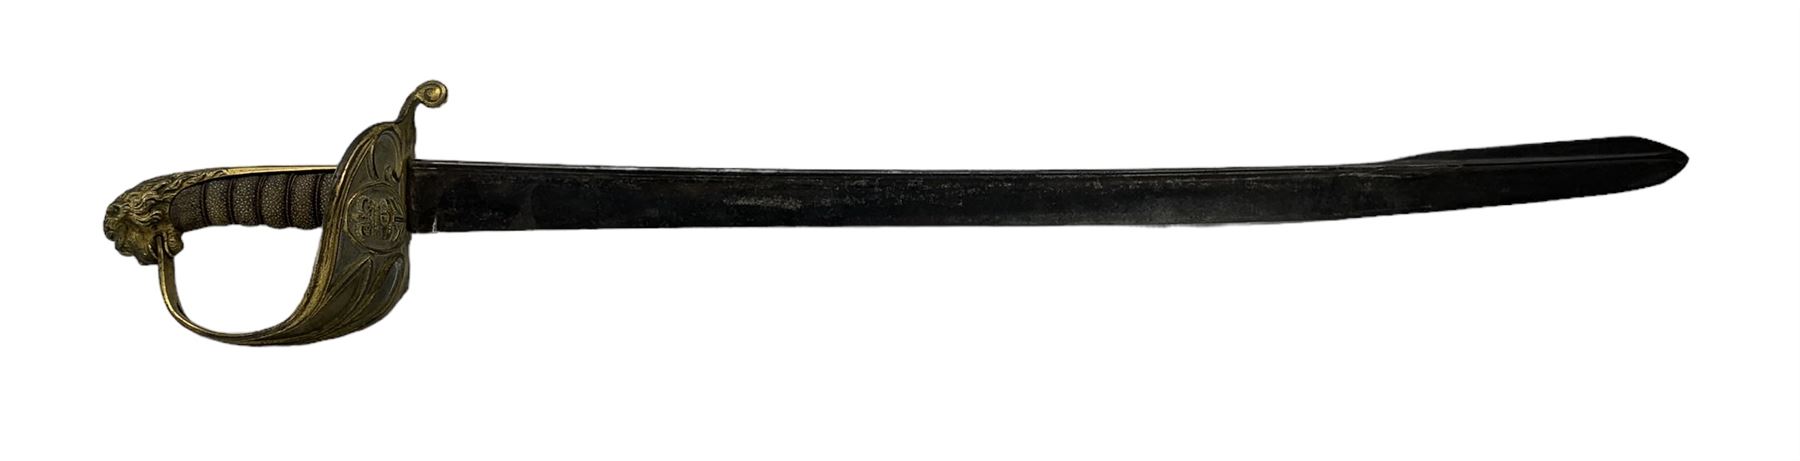 Early 19th century Naval officers sword with pipe back blade - Image 2 of 5